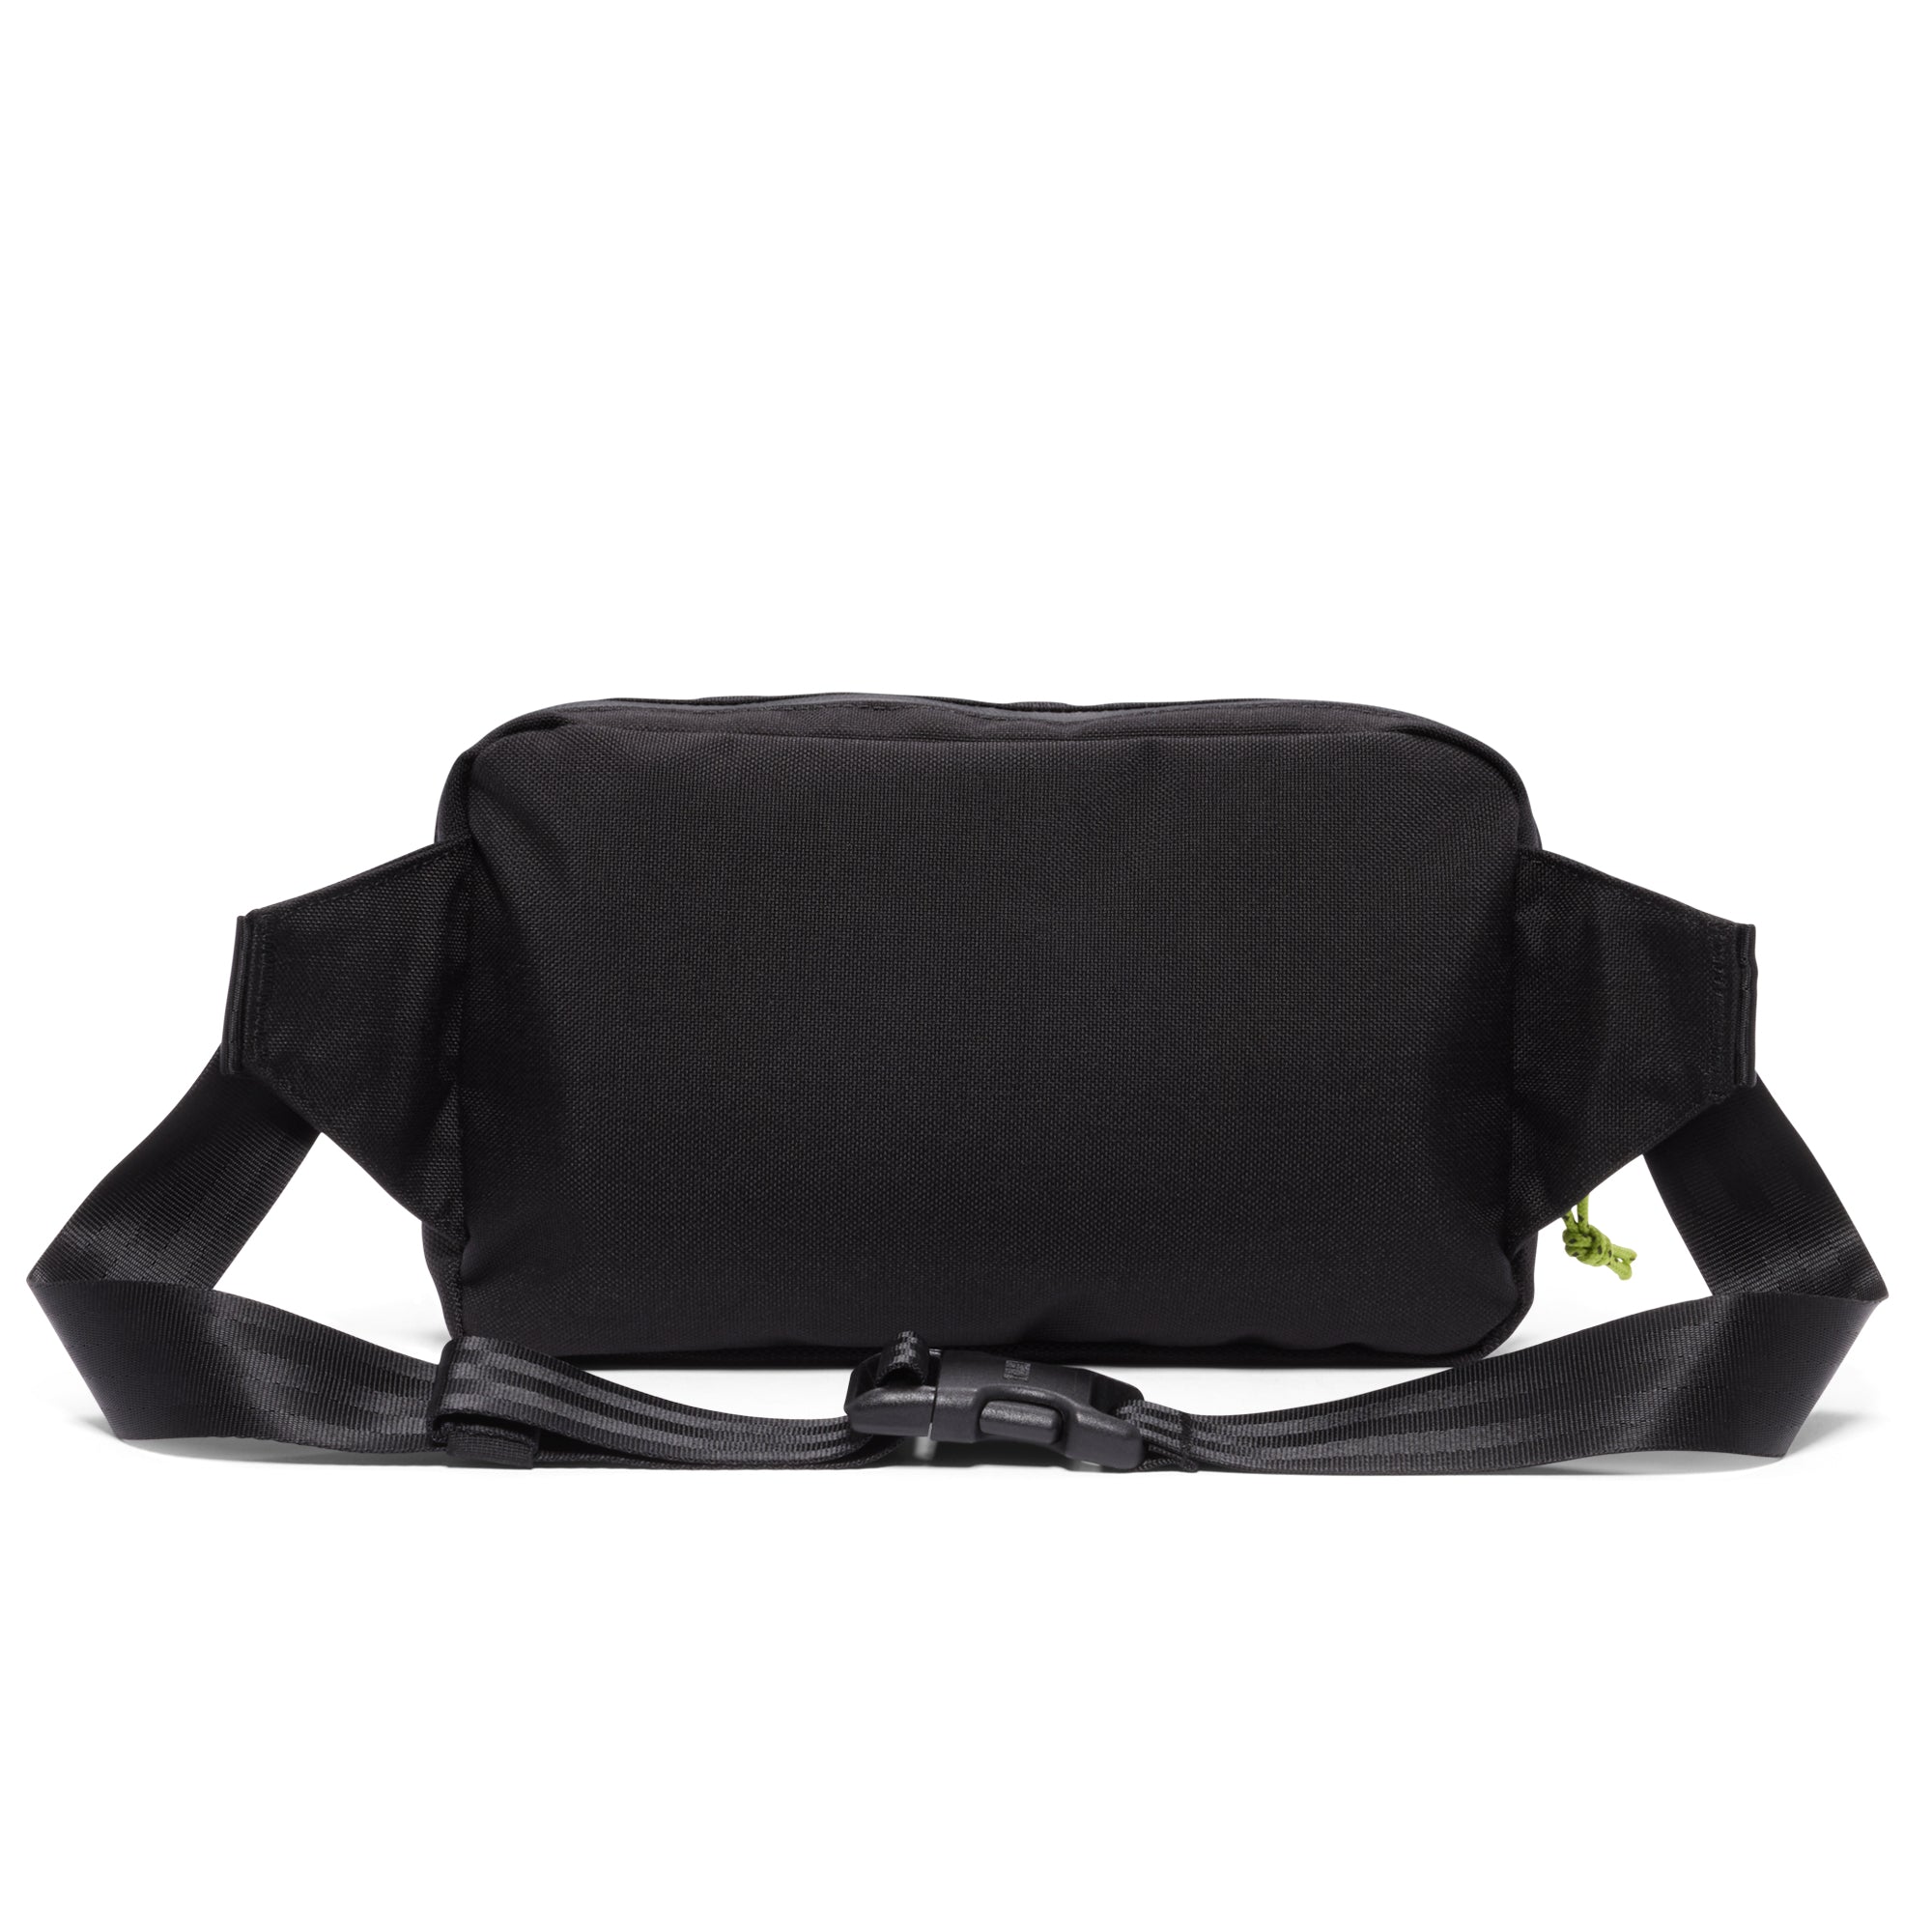 Ziptop waistpack collab with ALC with green liner back of bag #color_black / alc green